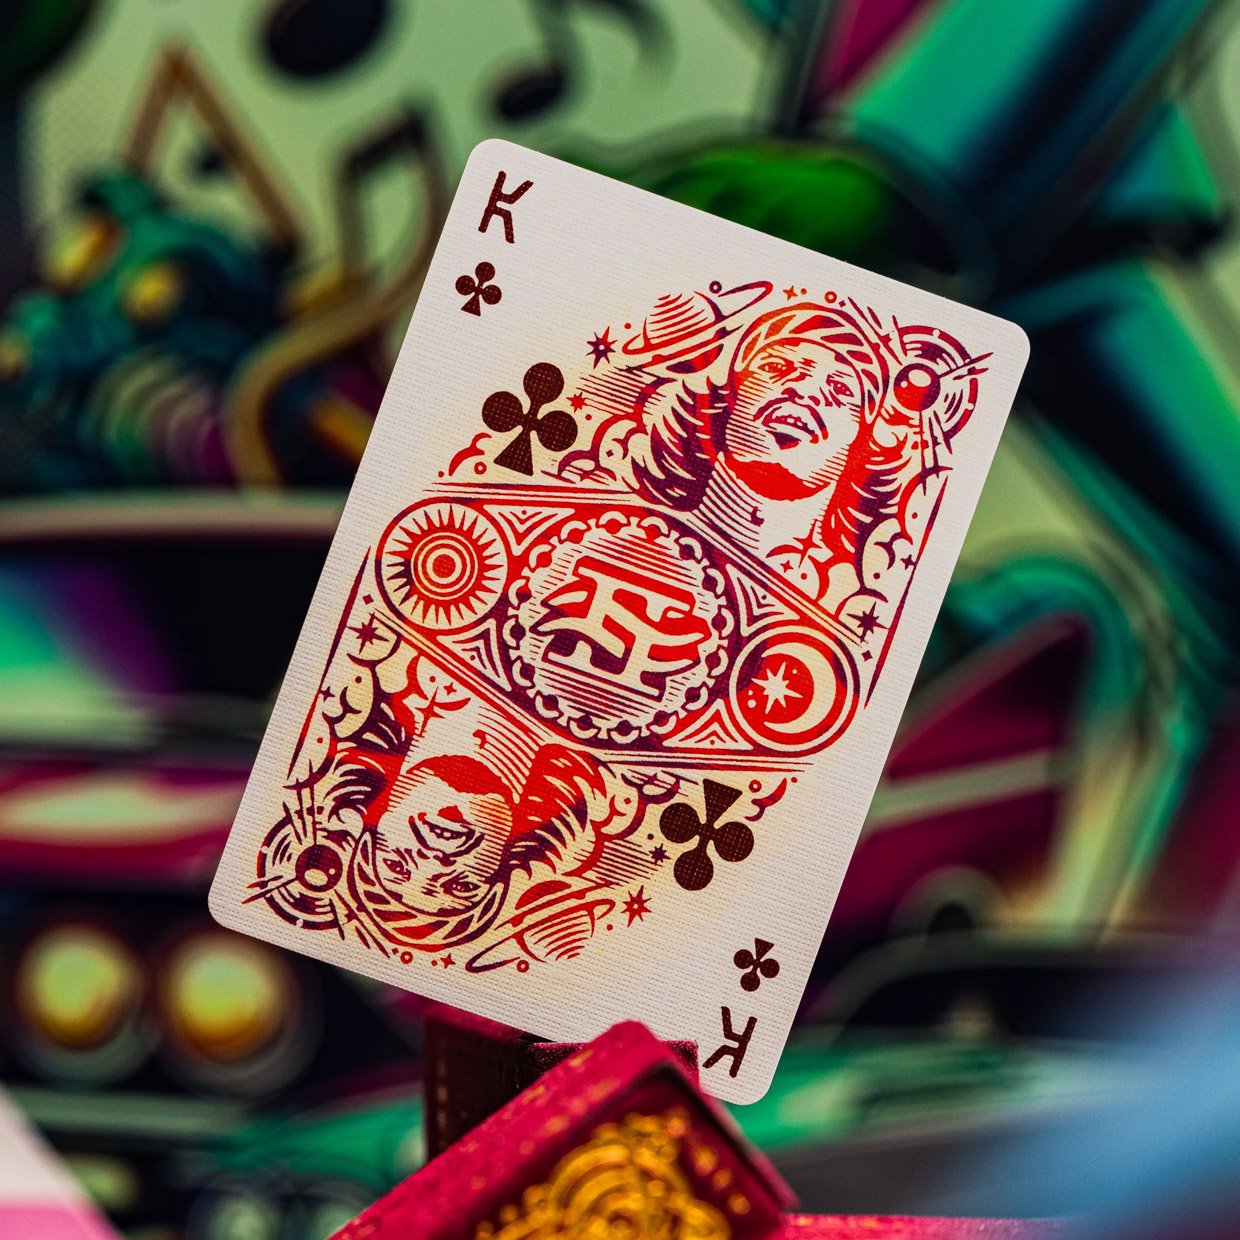 Theory11 x Outkast Playing Cards